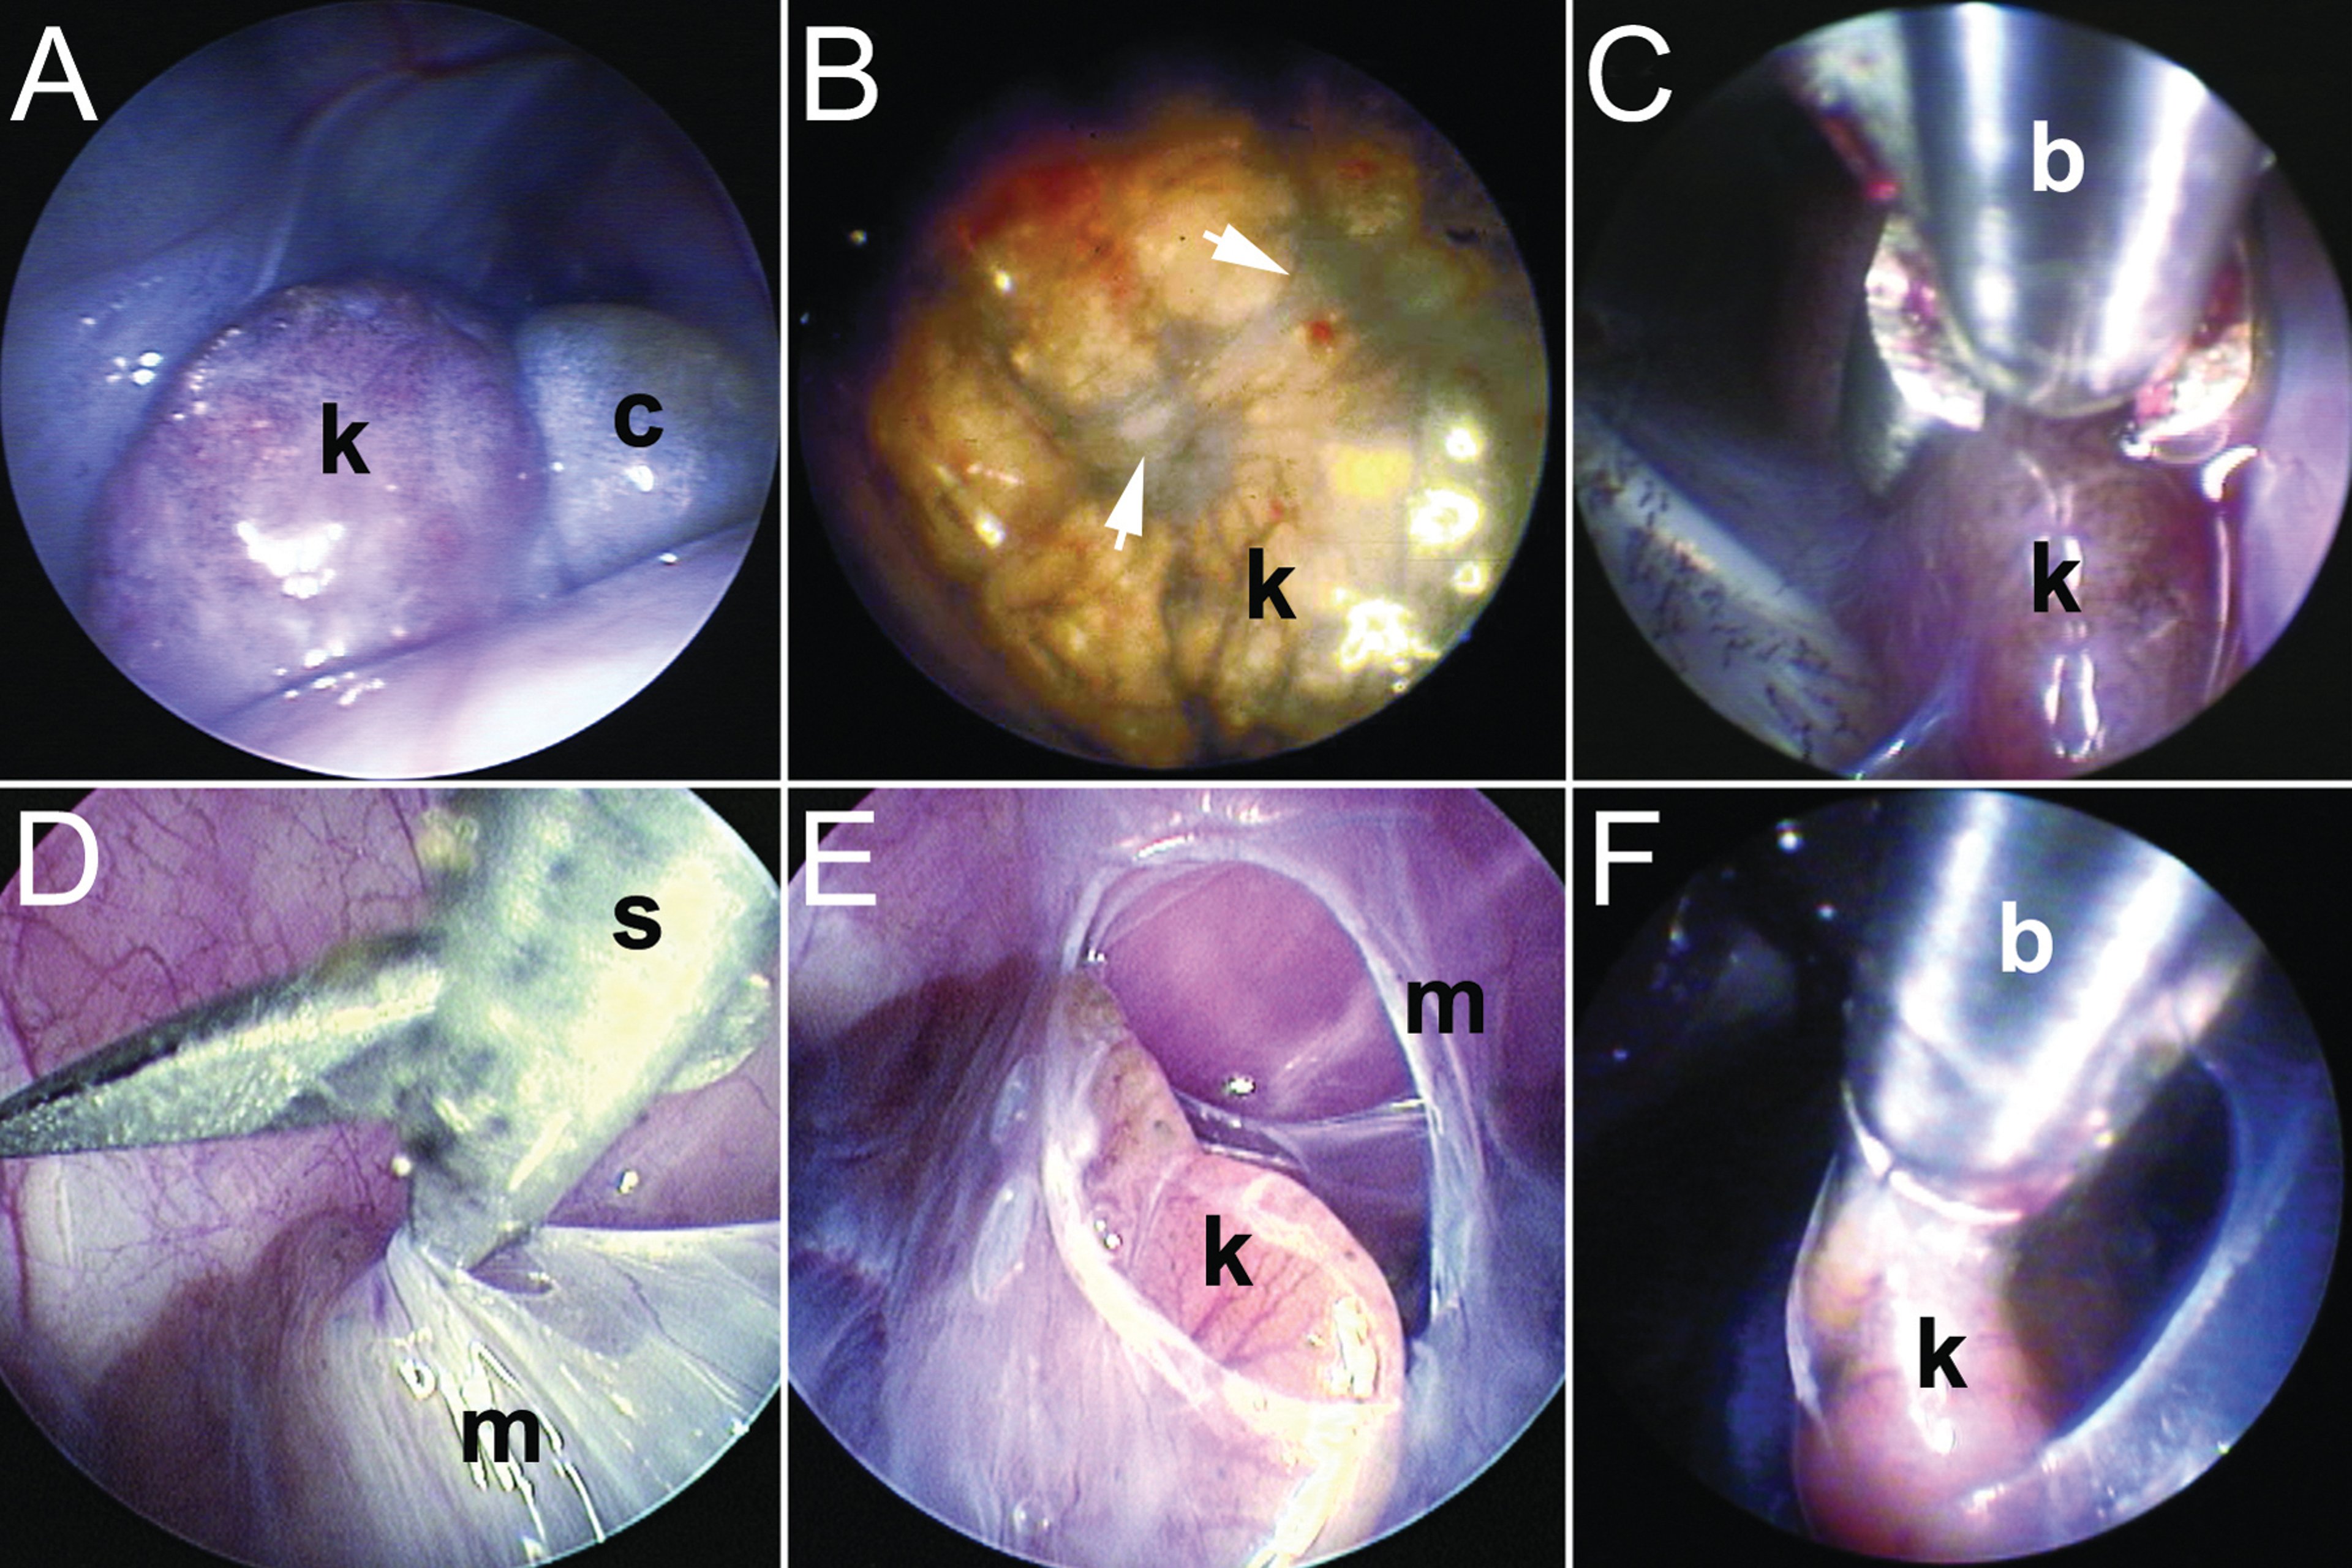 Endoscopic pathology and kidney biopsy, various reptiles